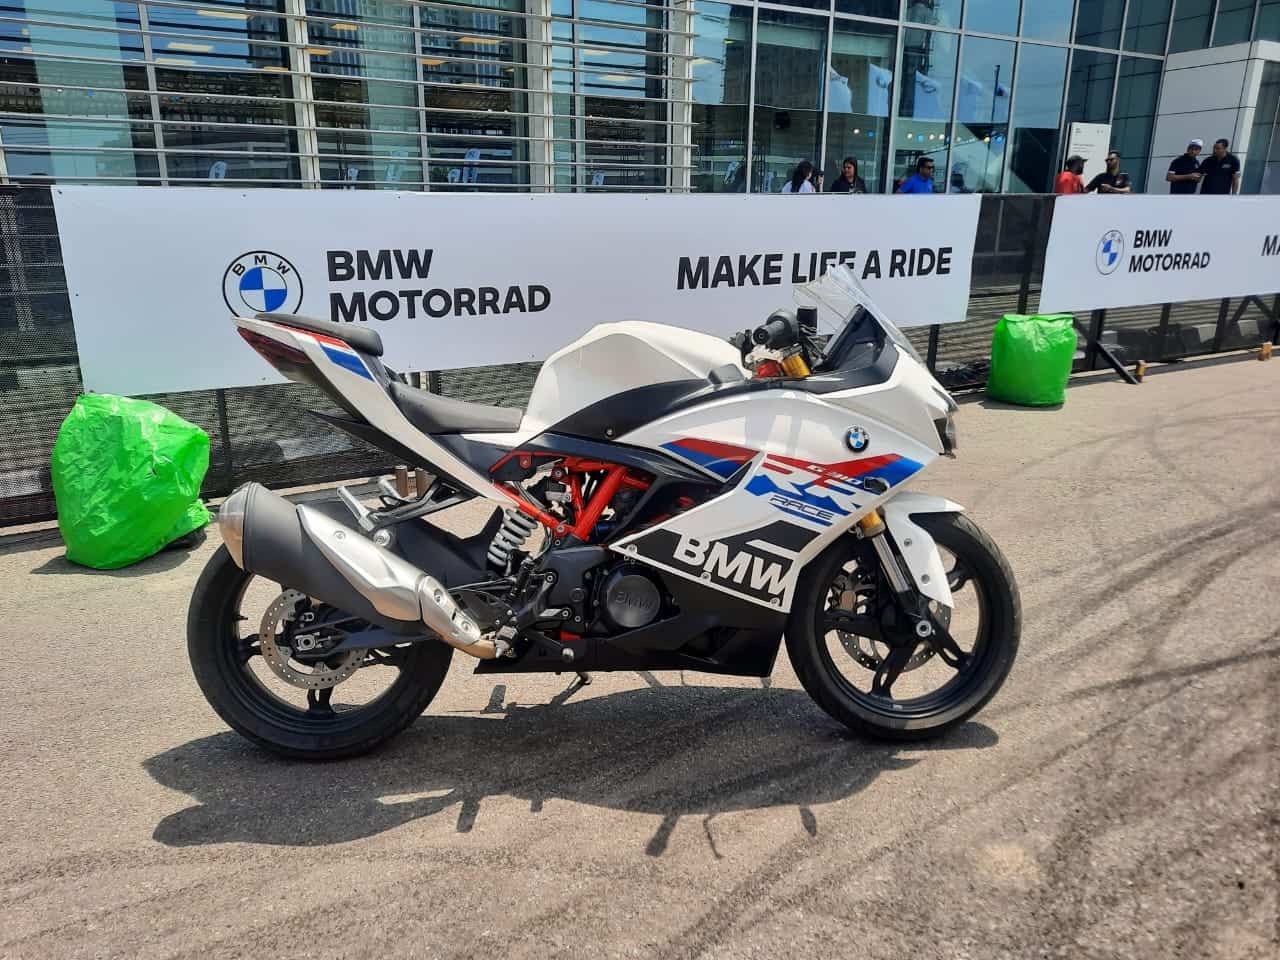 BMW G 310 RR: Features